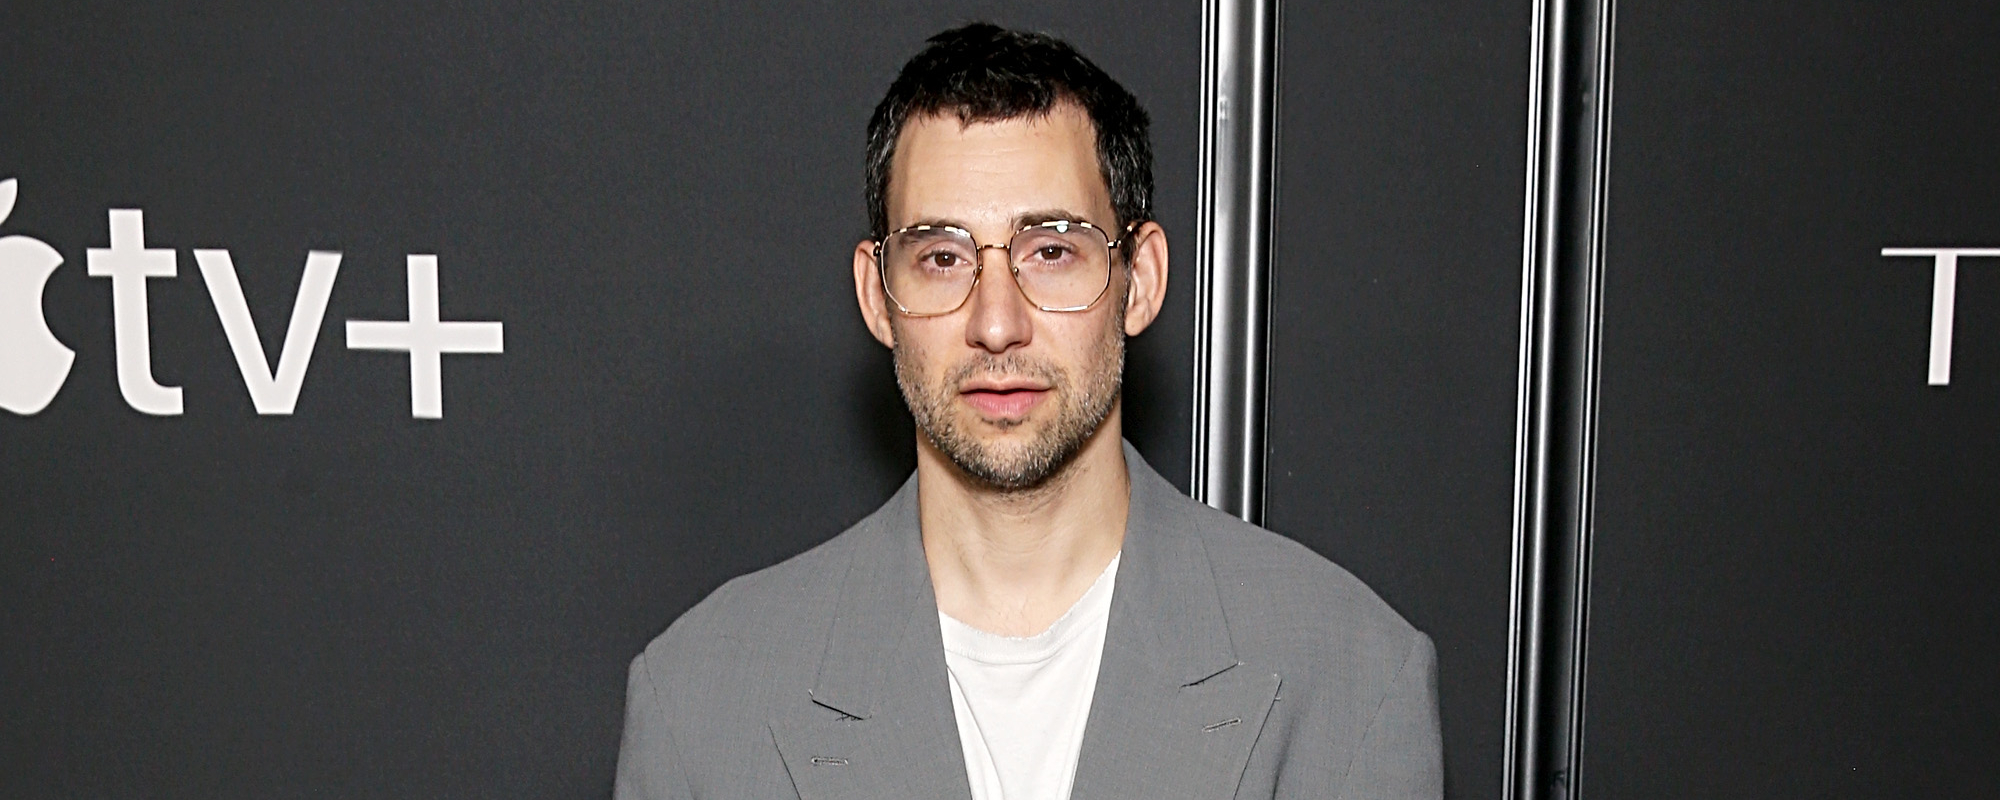 Jack Antonoff Has Words for One Specific Taylor Swift Critic, Likens Her to God